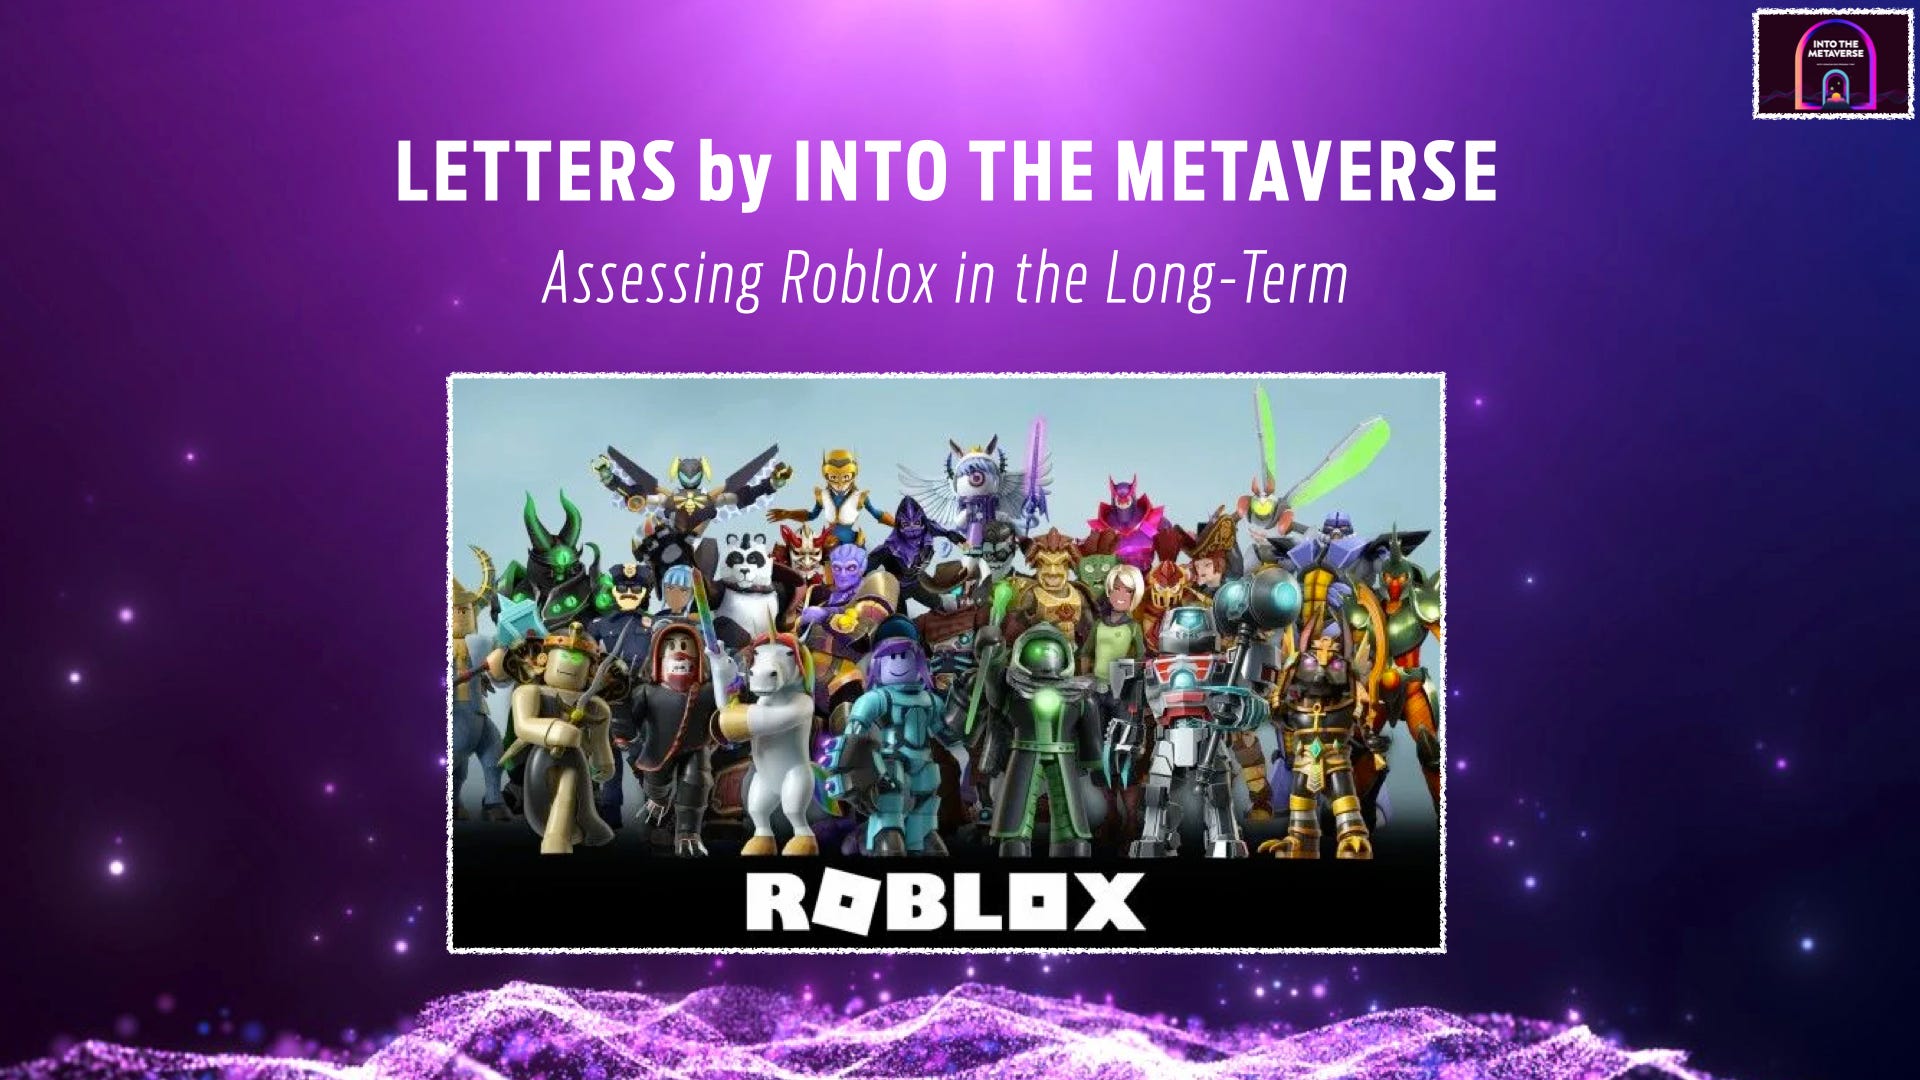 History of Roblox: A Metaverse Experiences